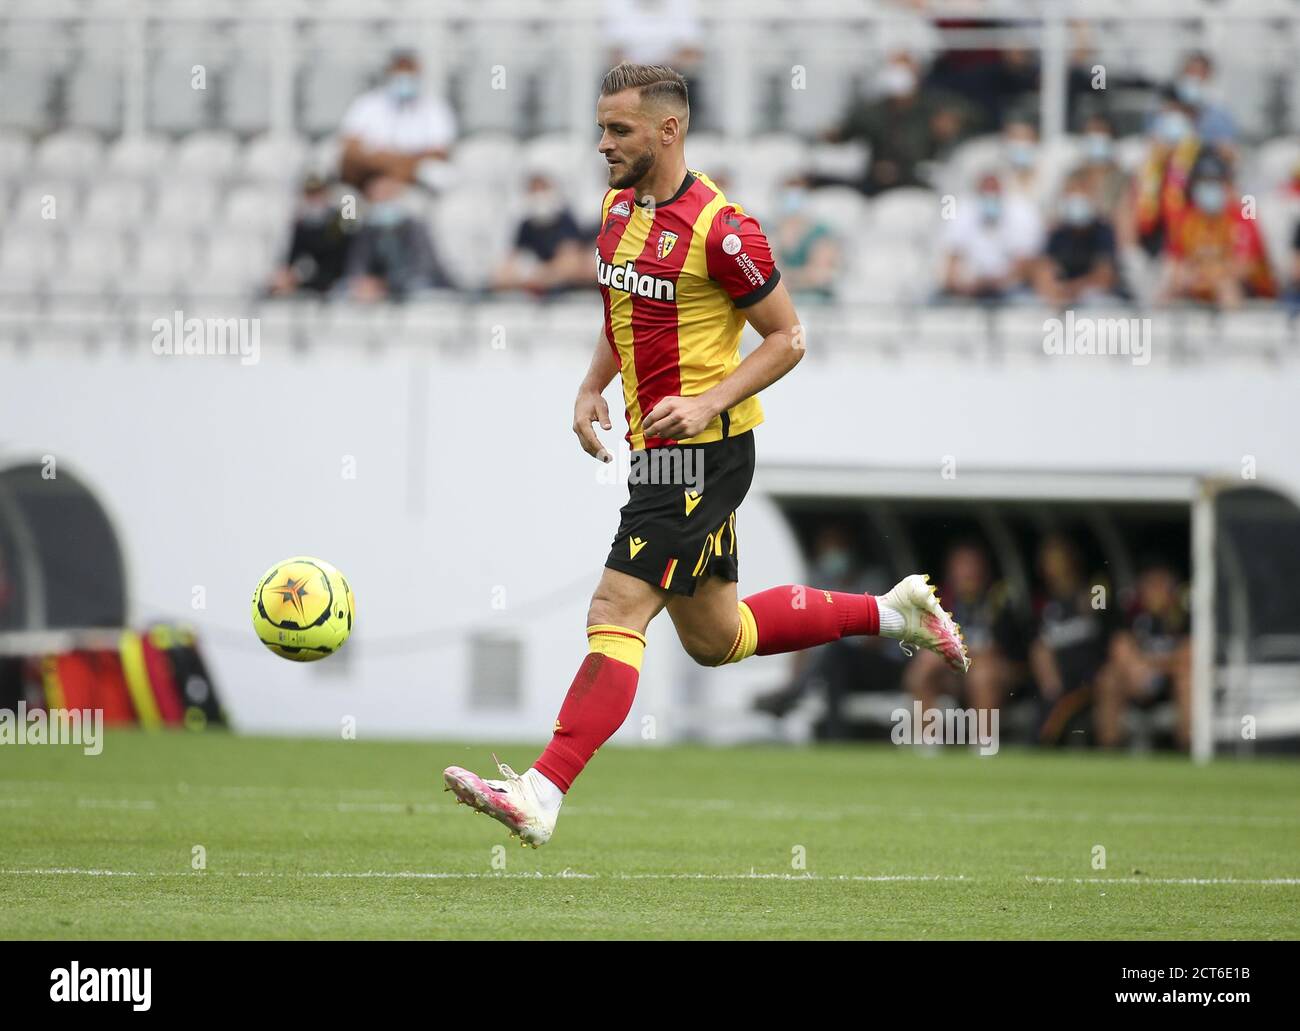 Jonathan Gradit of Lens during the French championship Ligue 1 football match between RC Lens and Girondins de Bordeaux on September 19, 2020 at Stade Stock Photo